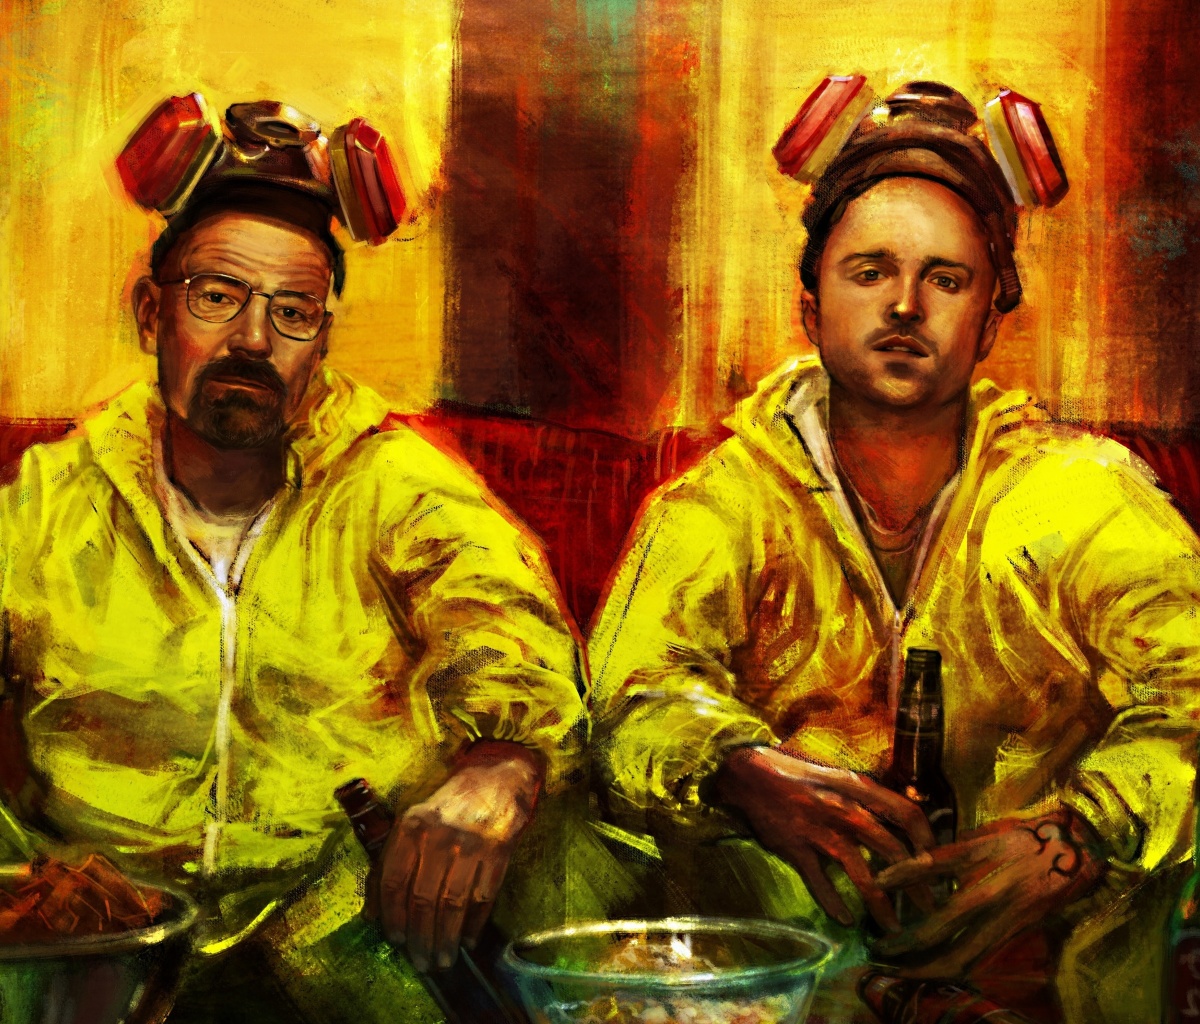 Breaking Bad with Walter White wallpaper 1200x1024